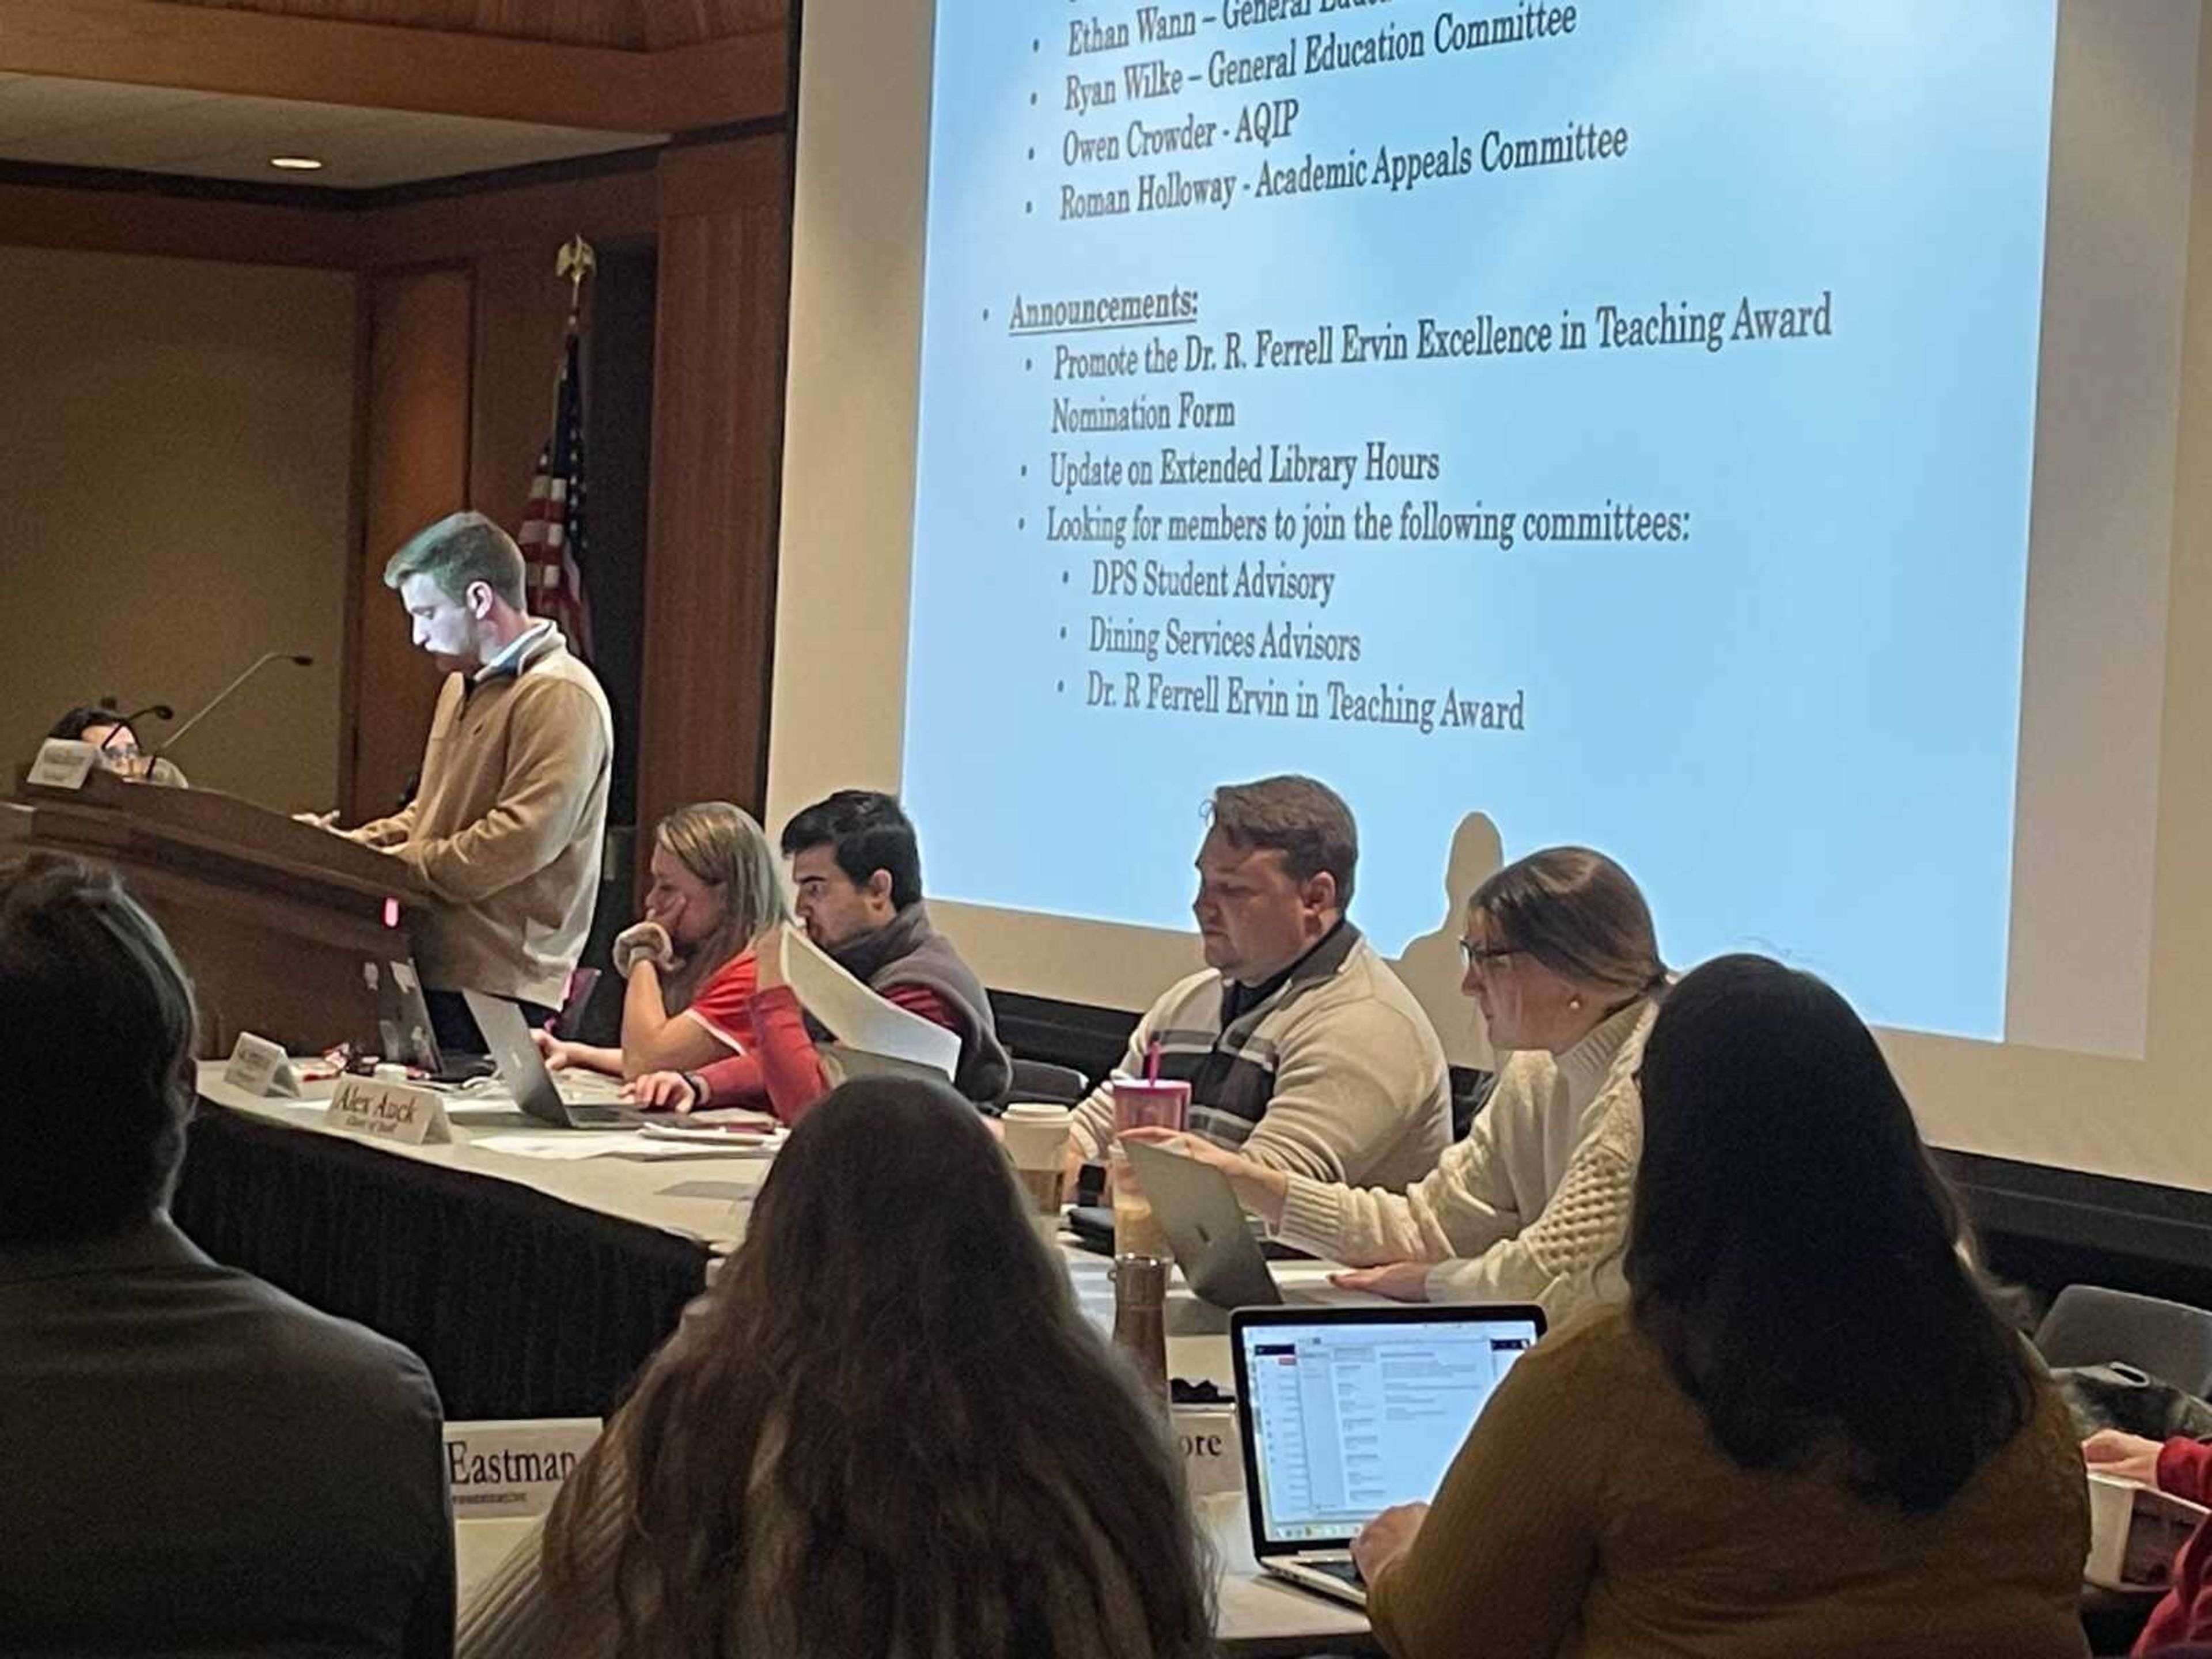 Joel Philpott announces information abotu the DPS Student Advisory during the Feb. 21 student government meeting. SGA is seeking more students to join the committee, which works directly with director of public safety Beth Glaus, Philpott says.